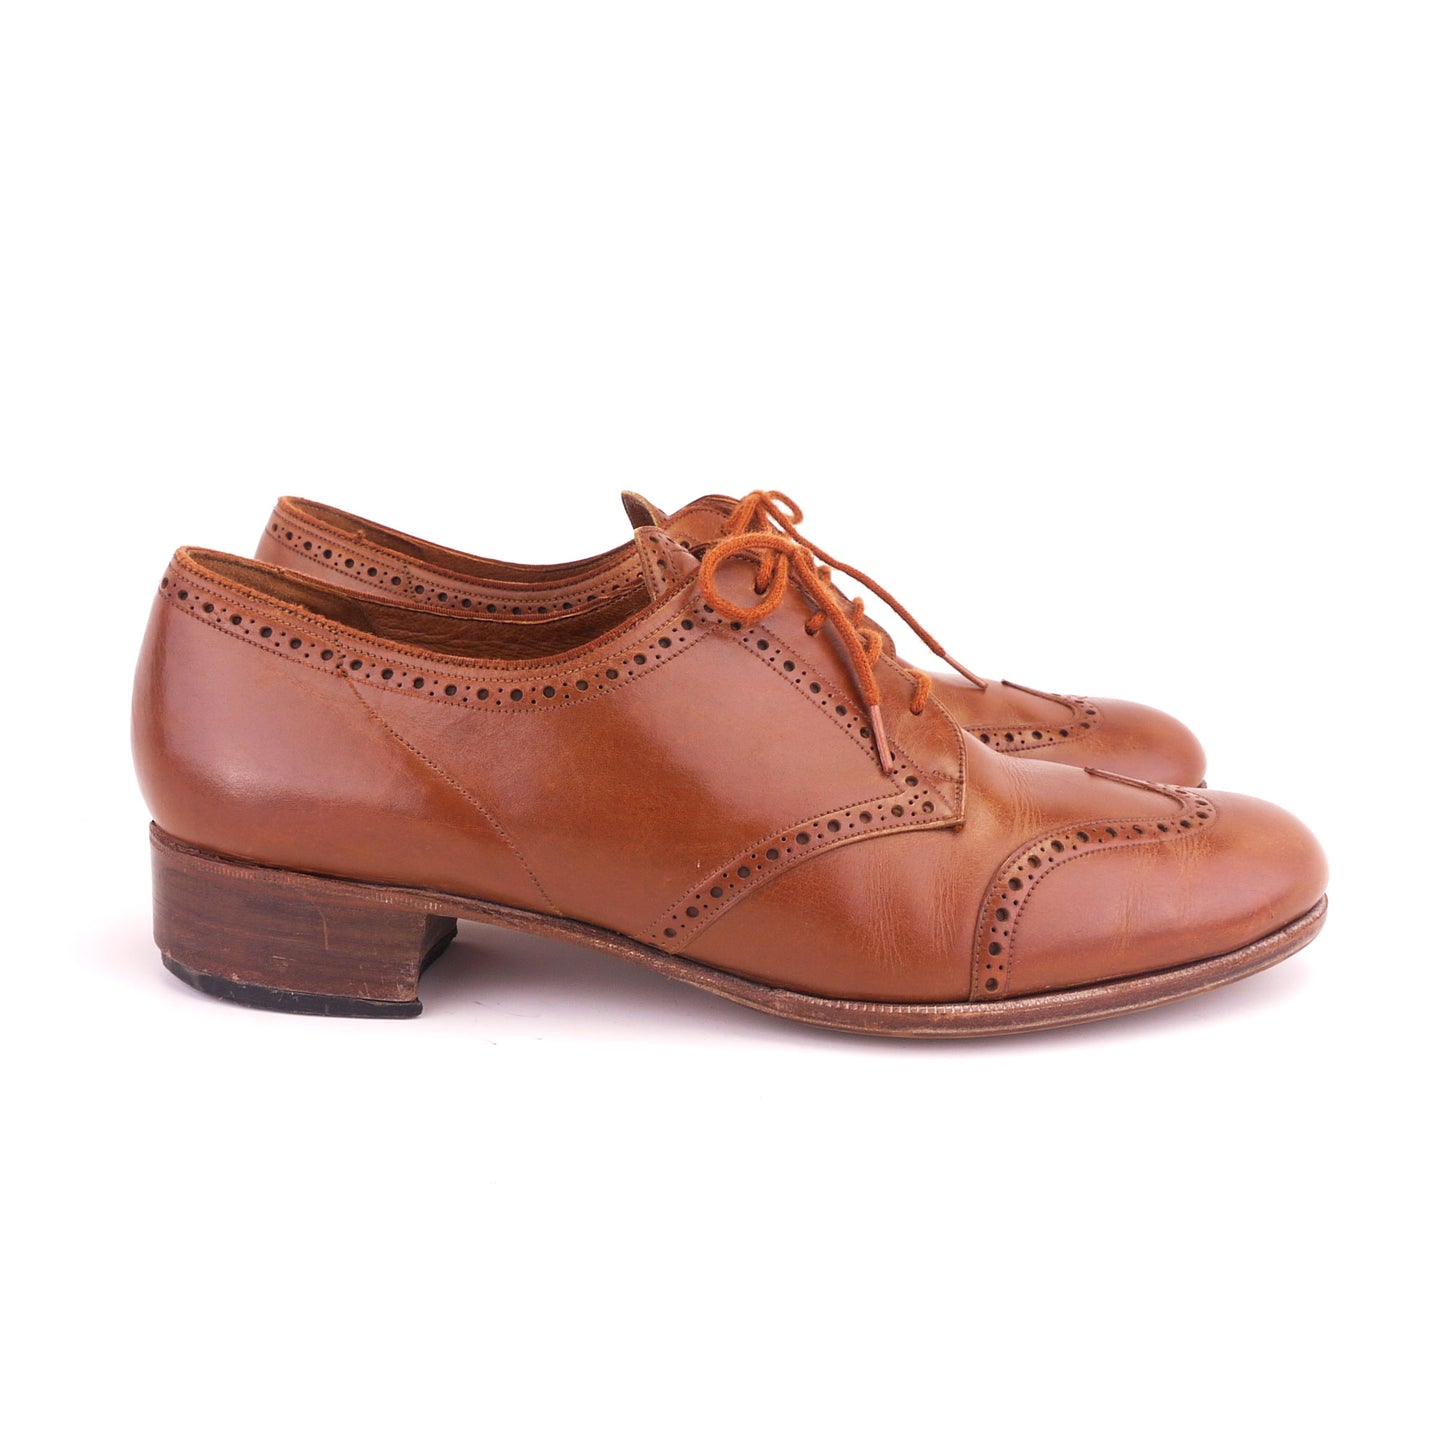 1950s Physical Culture Wing Tip Brogues UK 8.5